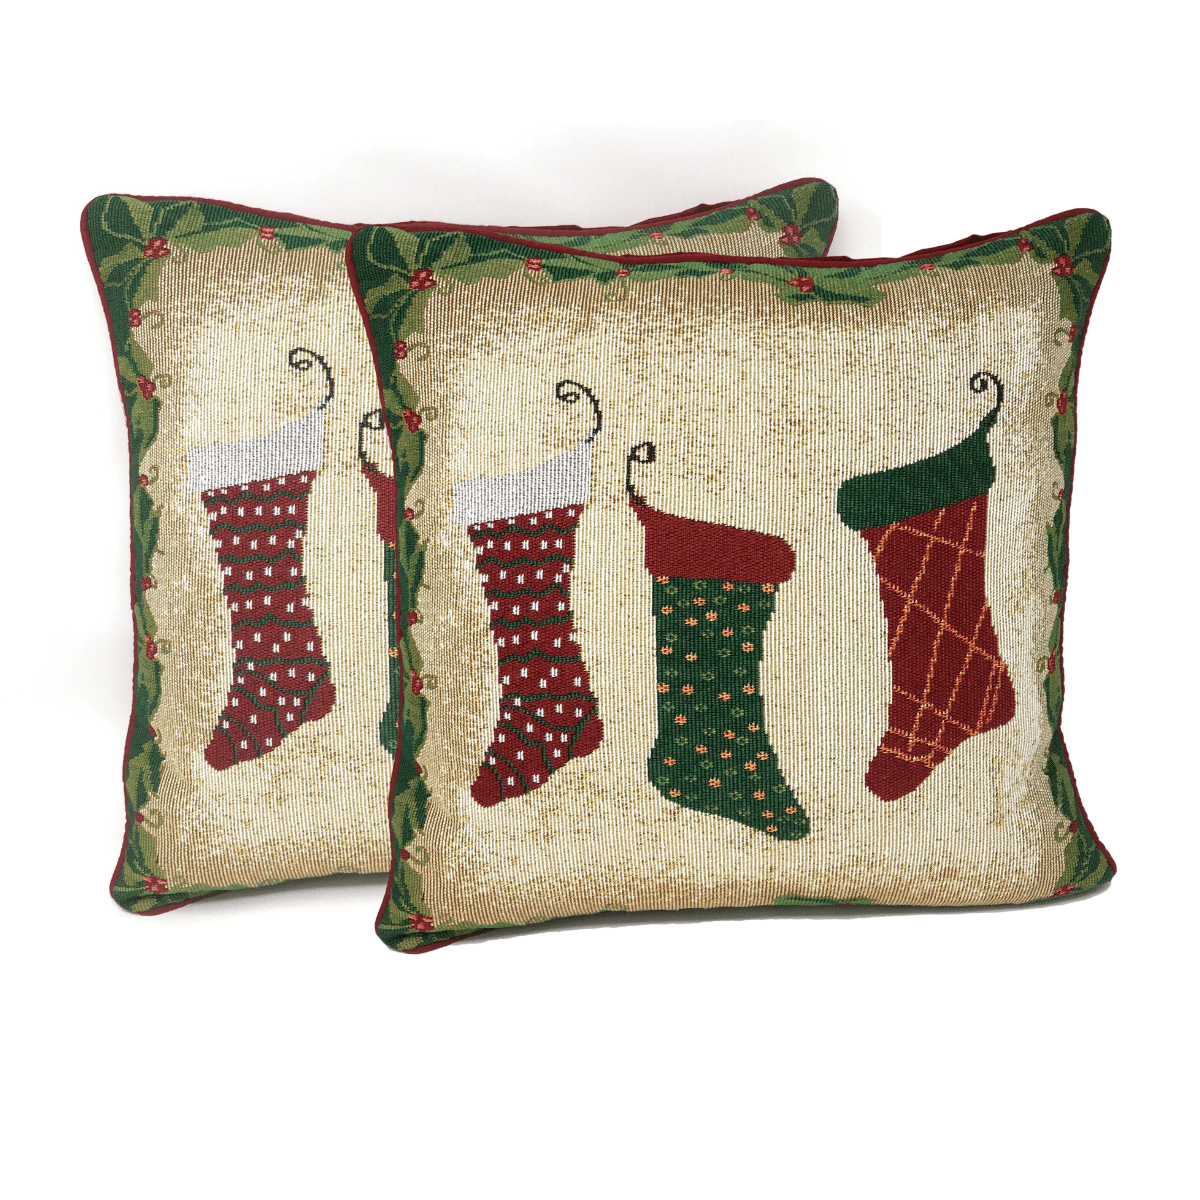 Tache Festive Christmas Holiday Hang My Stockings By the Fireplace Throw Pillow Cover (12910CC) - Tache Home Fashion